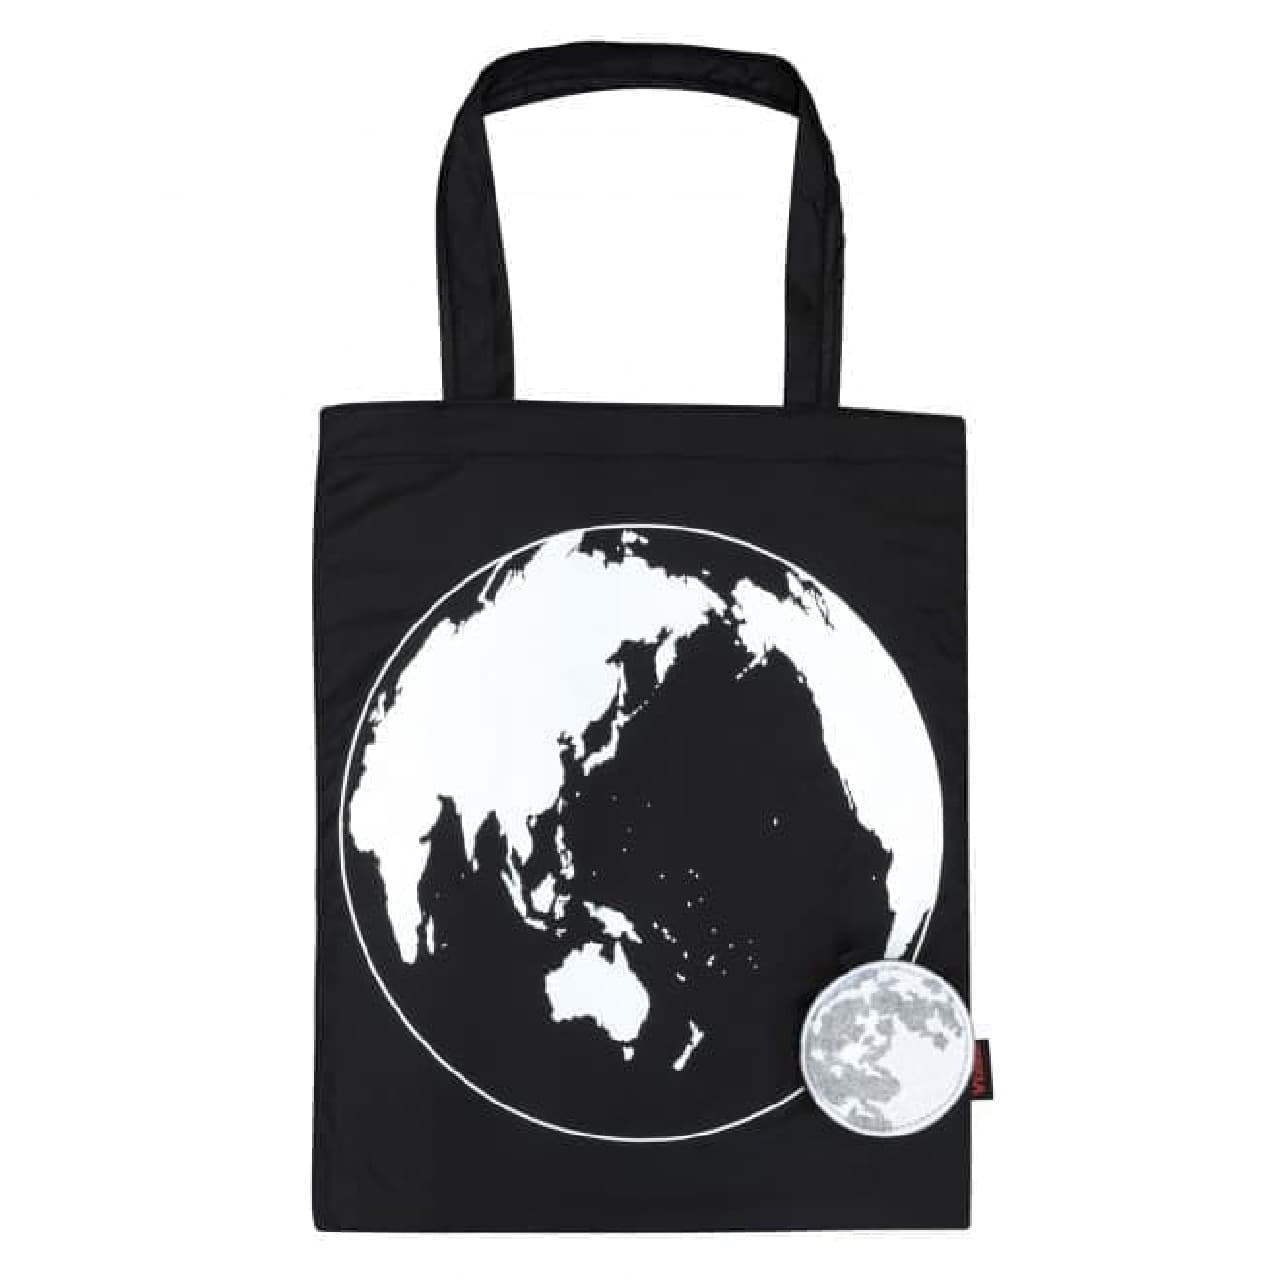 Eco bag "Moon Eco Bag" designed for the moon and the earth from Vixen